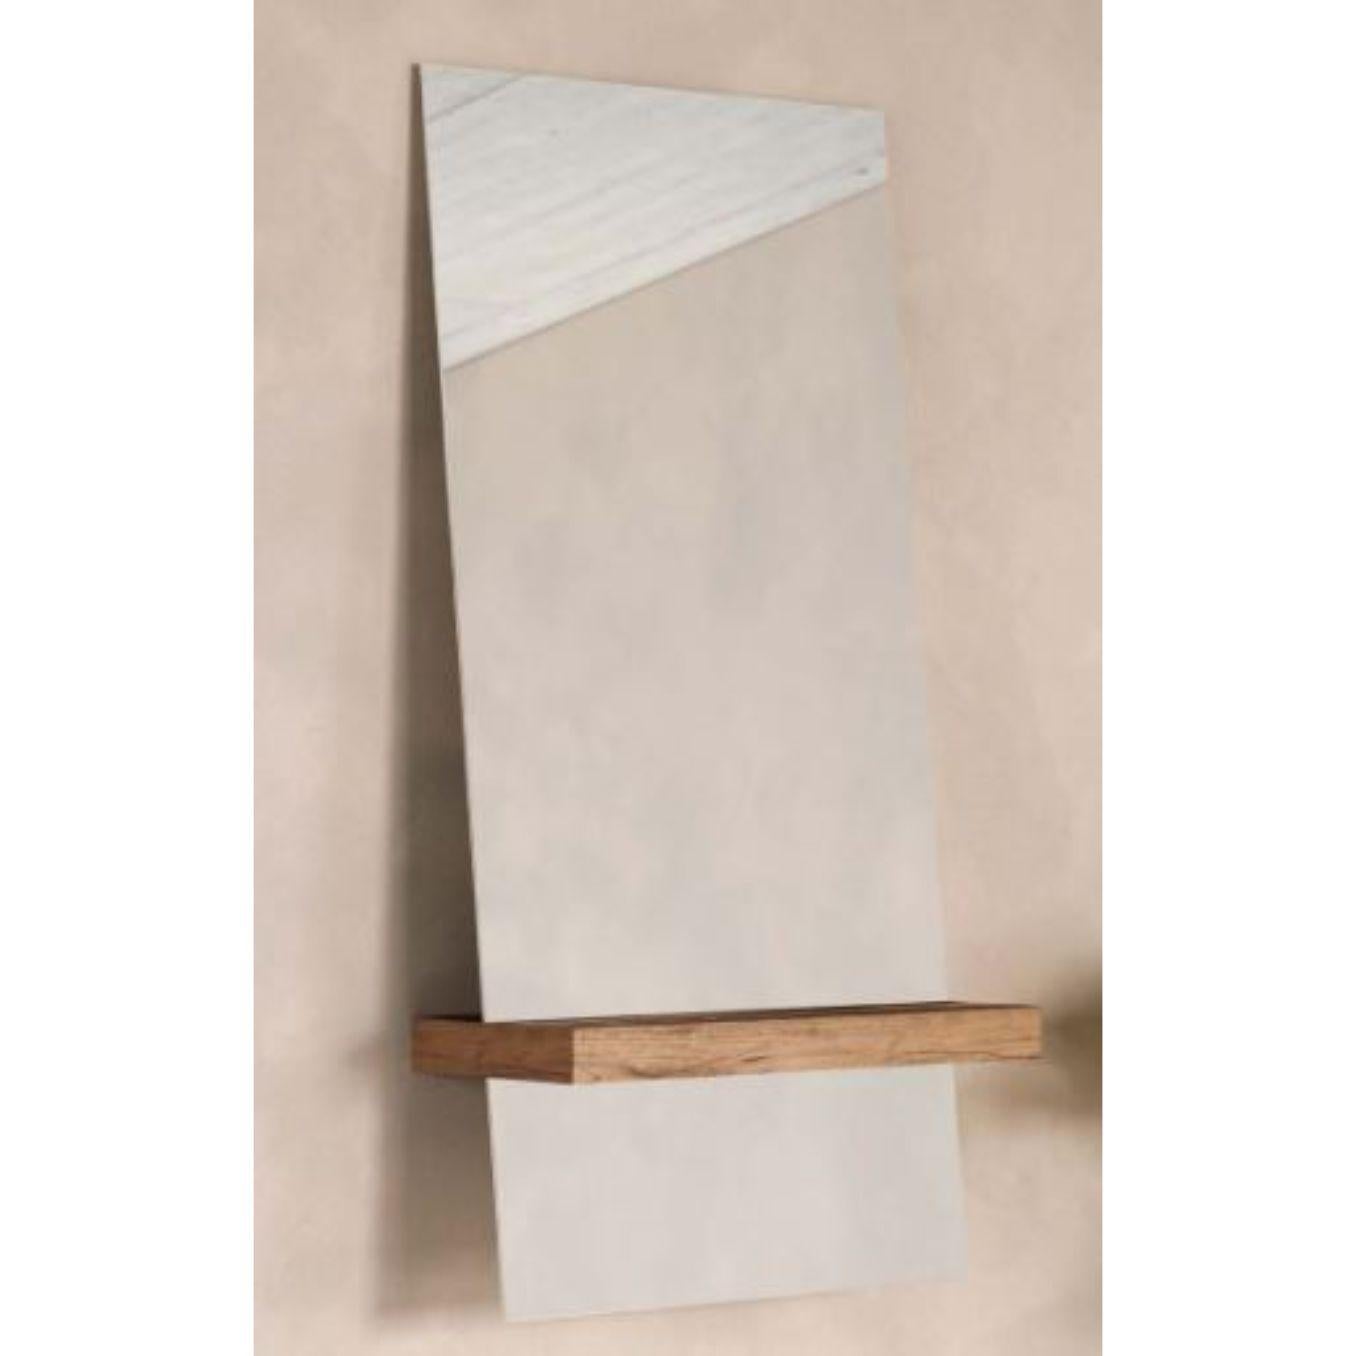 Oak rectangular Guillotine mirror by Jeffrey Huyghe.
Dimensions: D 30 x W 80 x H 156.5 cm
Materials: Oak natural oiled, mirror.
Also available in different materials.

Guillotine is designed with the IDEA in mind to keep your hallway clean and